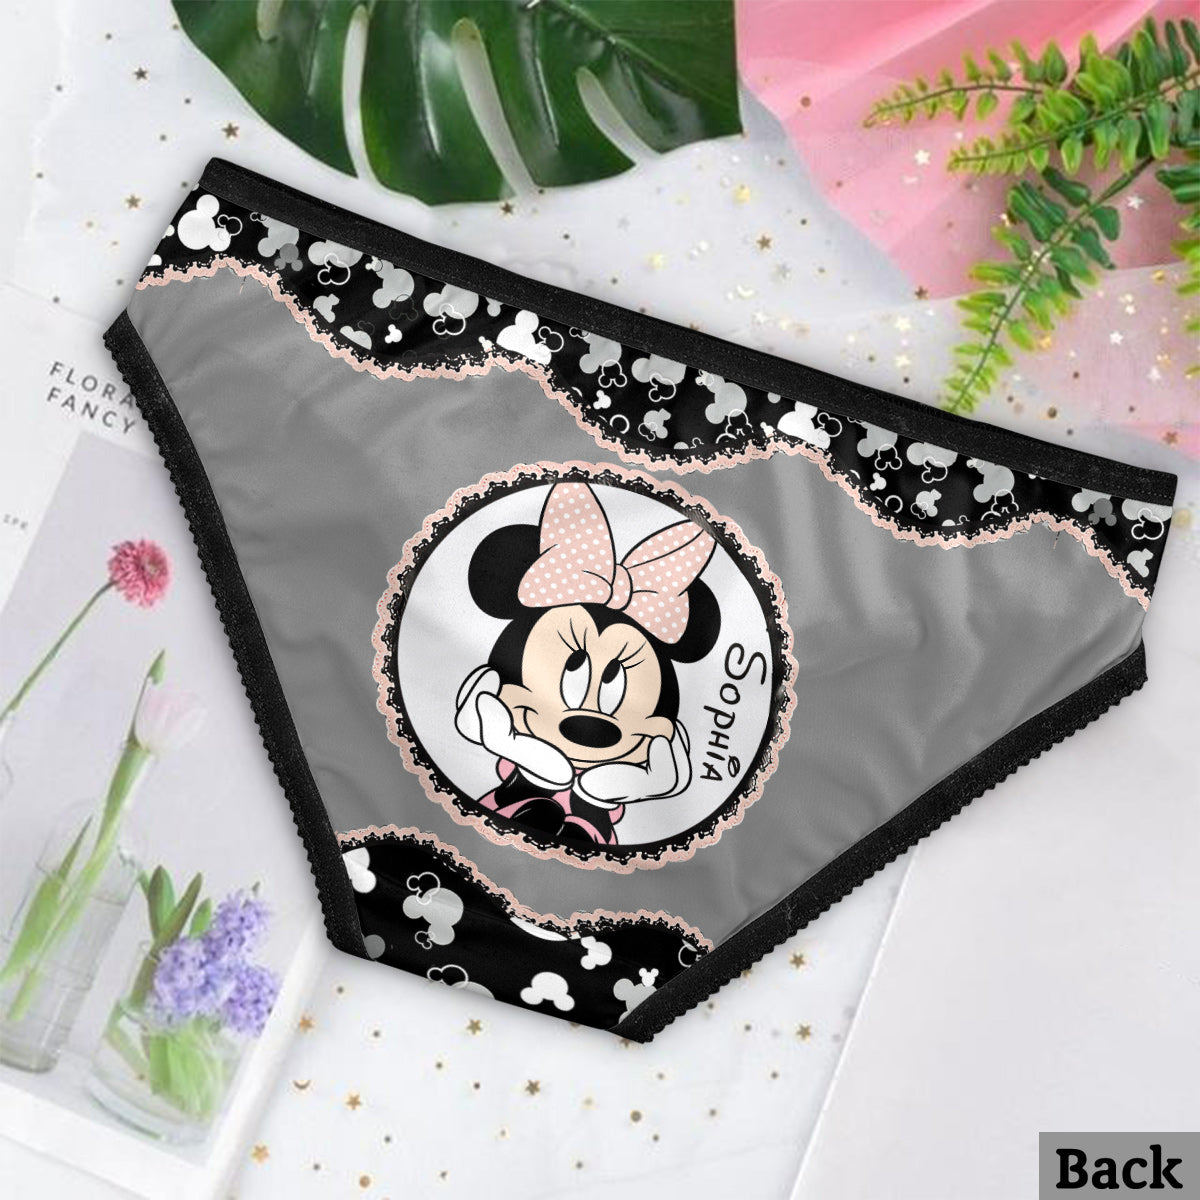 Well I'm Not Going To Lick Myself - Personalized Mouse Lace Border Women Briefs